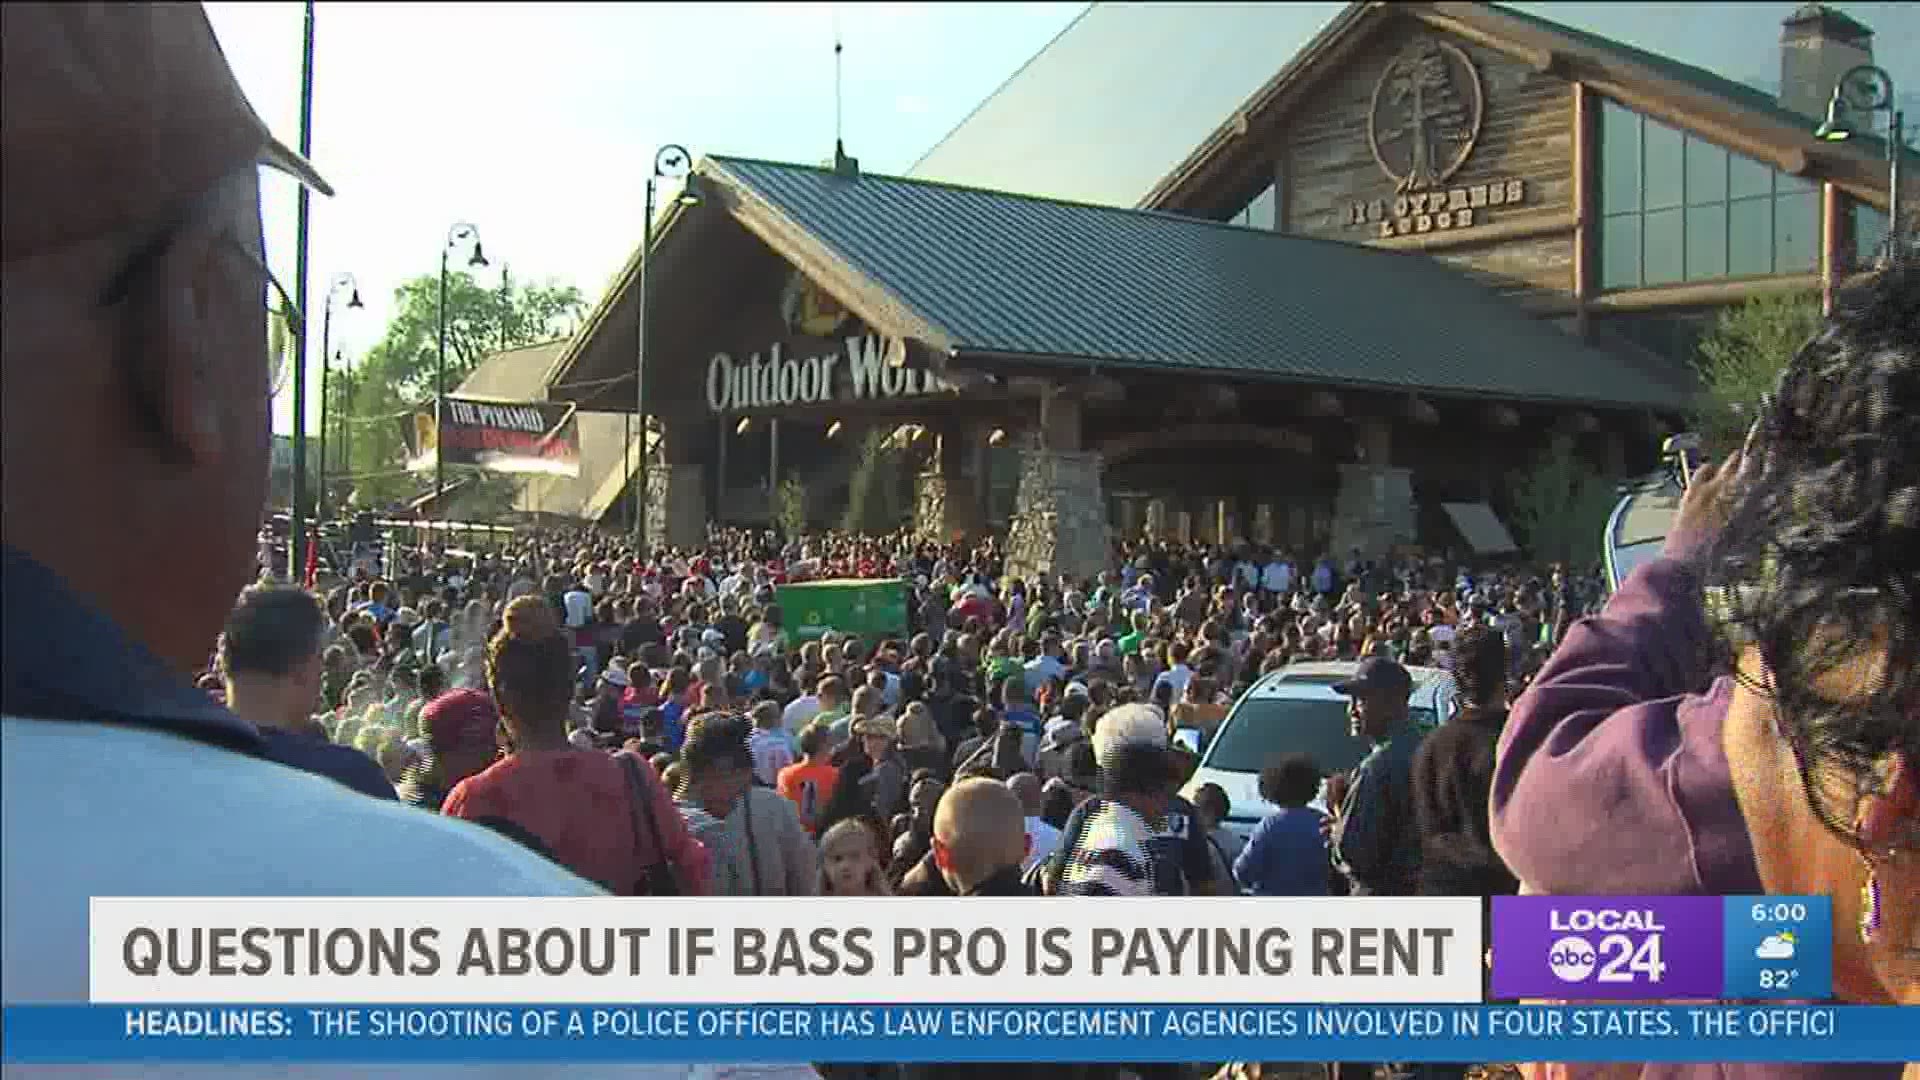 Bass Pro said it's paid up, and documents first released to media showing shortage were incomplete, according to Mayor Strickland's spokesperson.